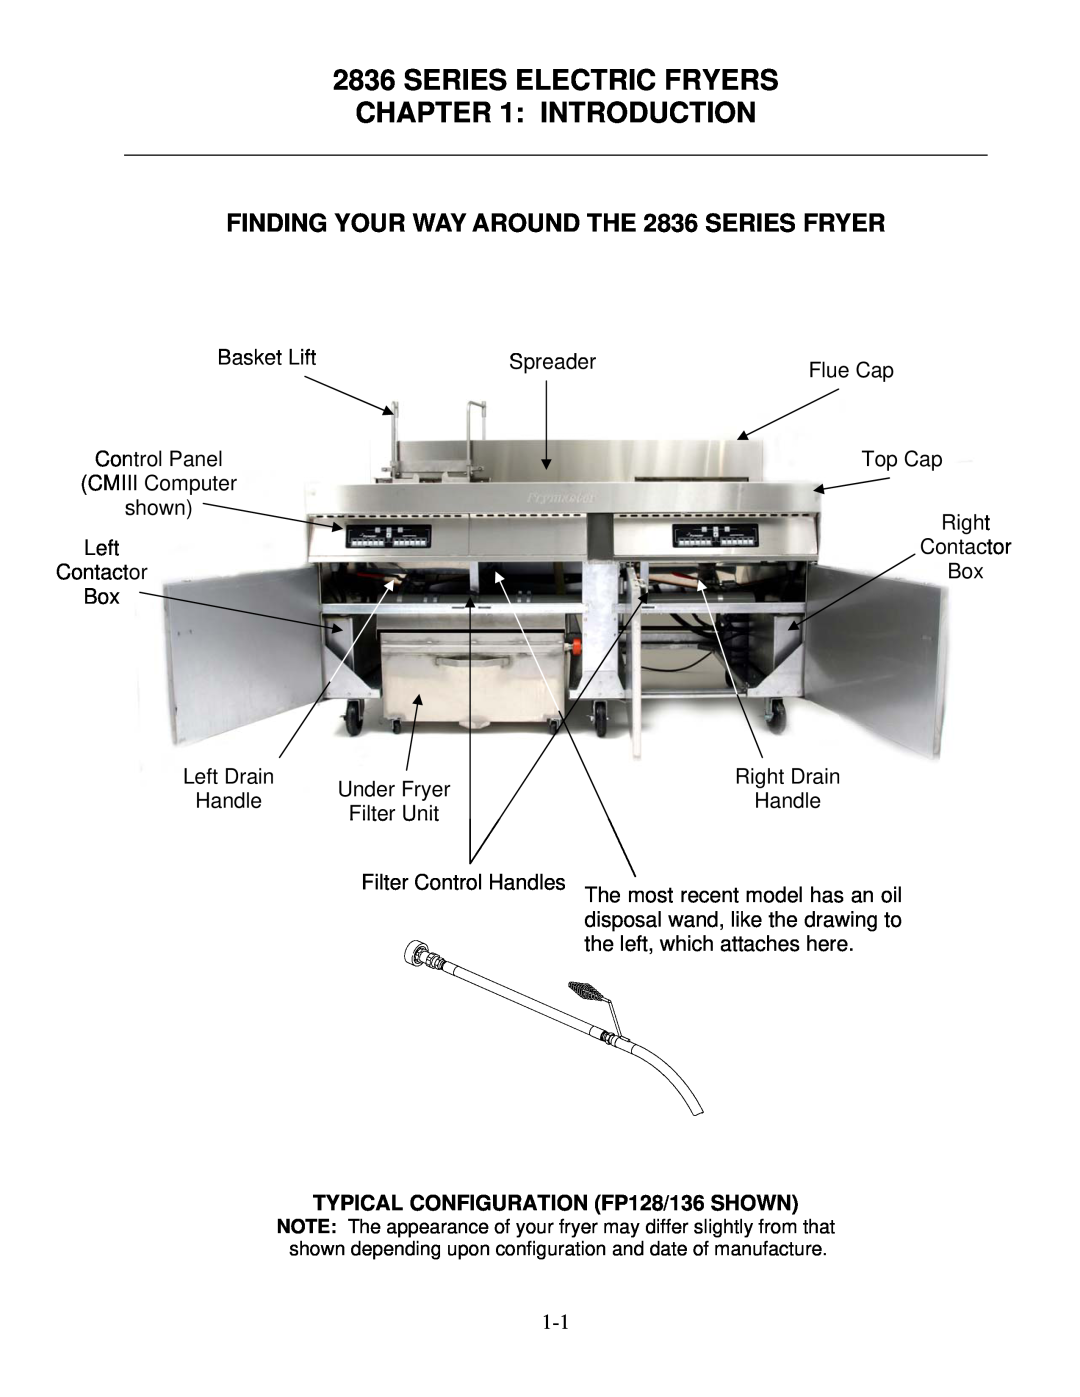 Frymaster 2836 Series operation manual FINDING YOUR WAY AROUND THE 2836 SERIES FRYER, TYPICAL CONFIGURATION FP128/136 SHOWN 